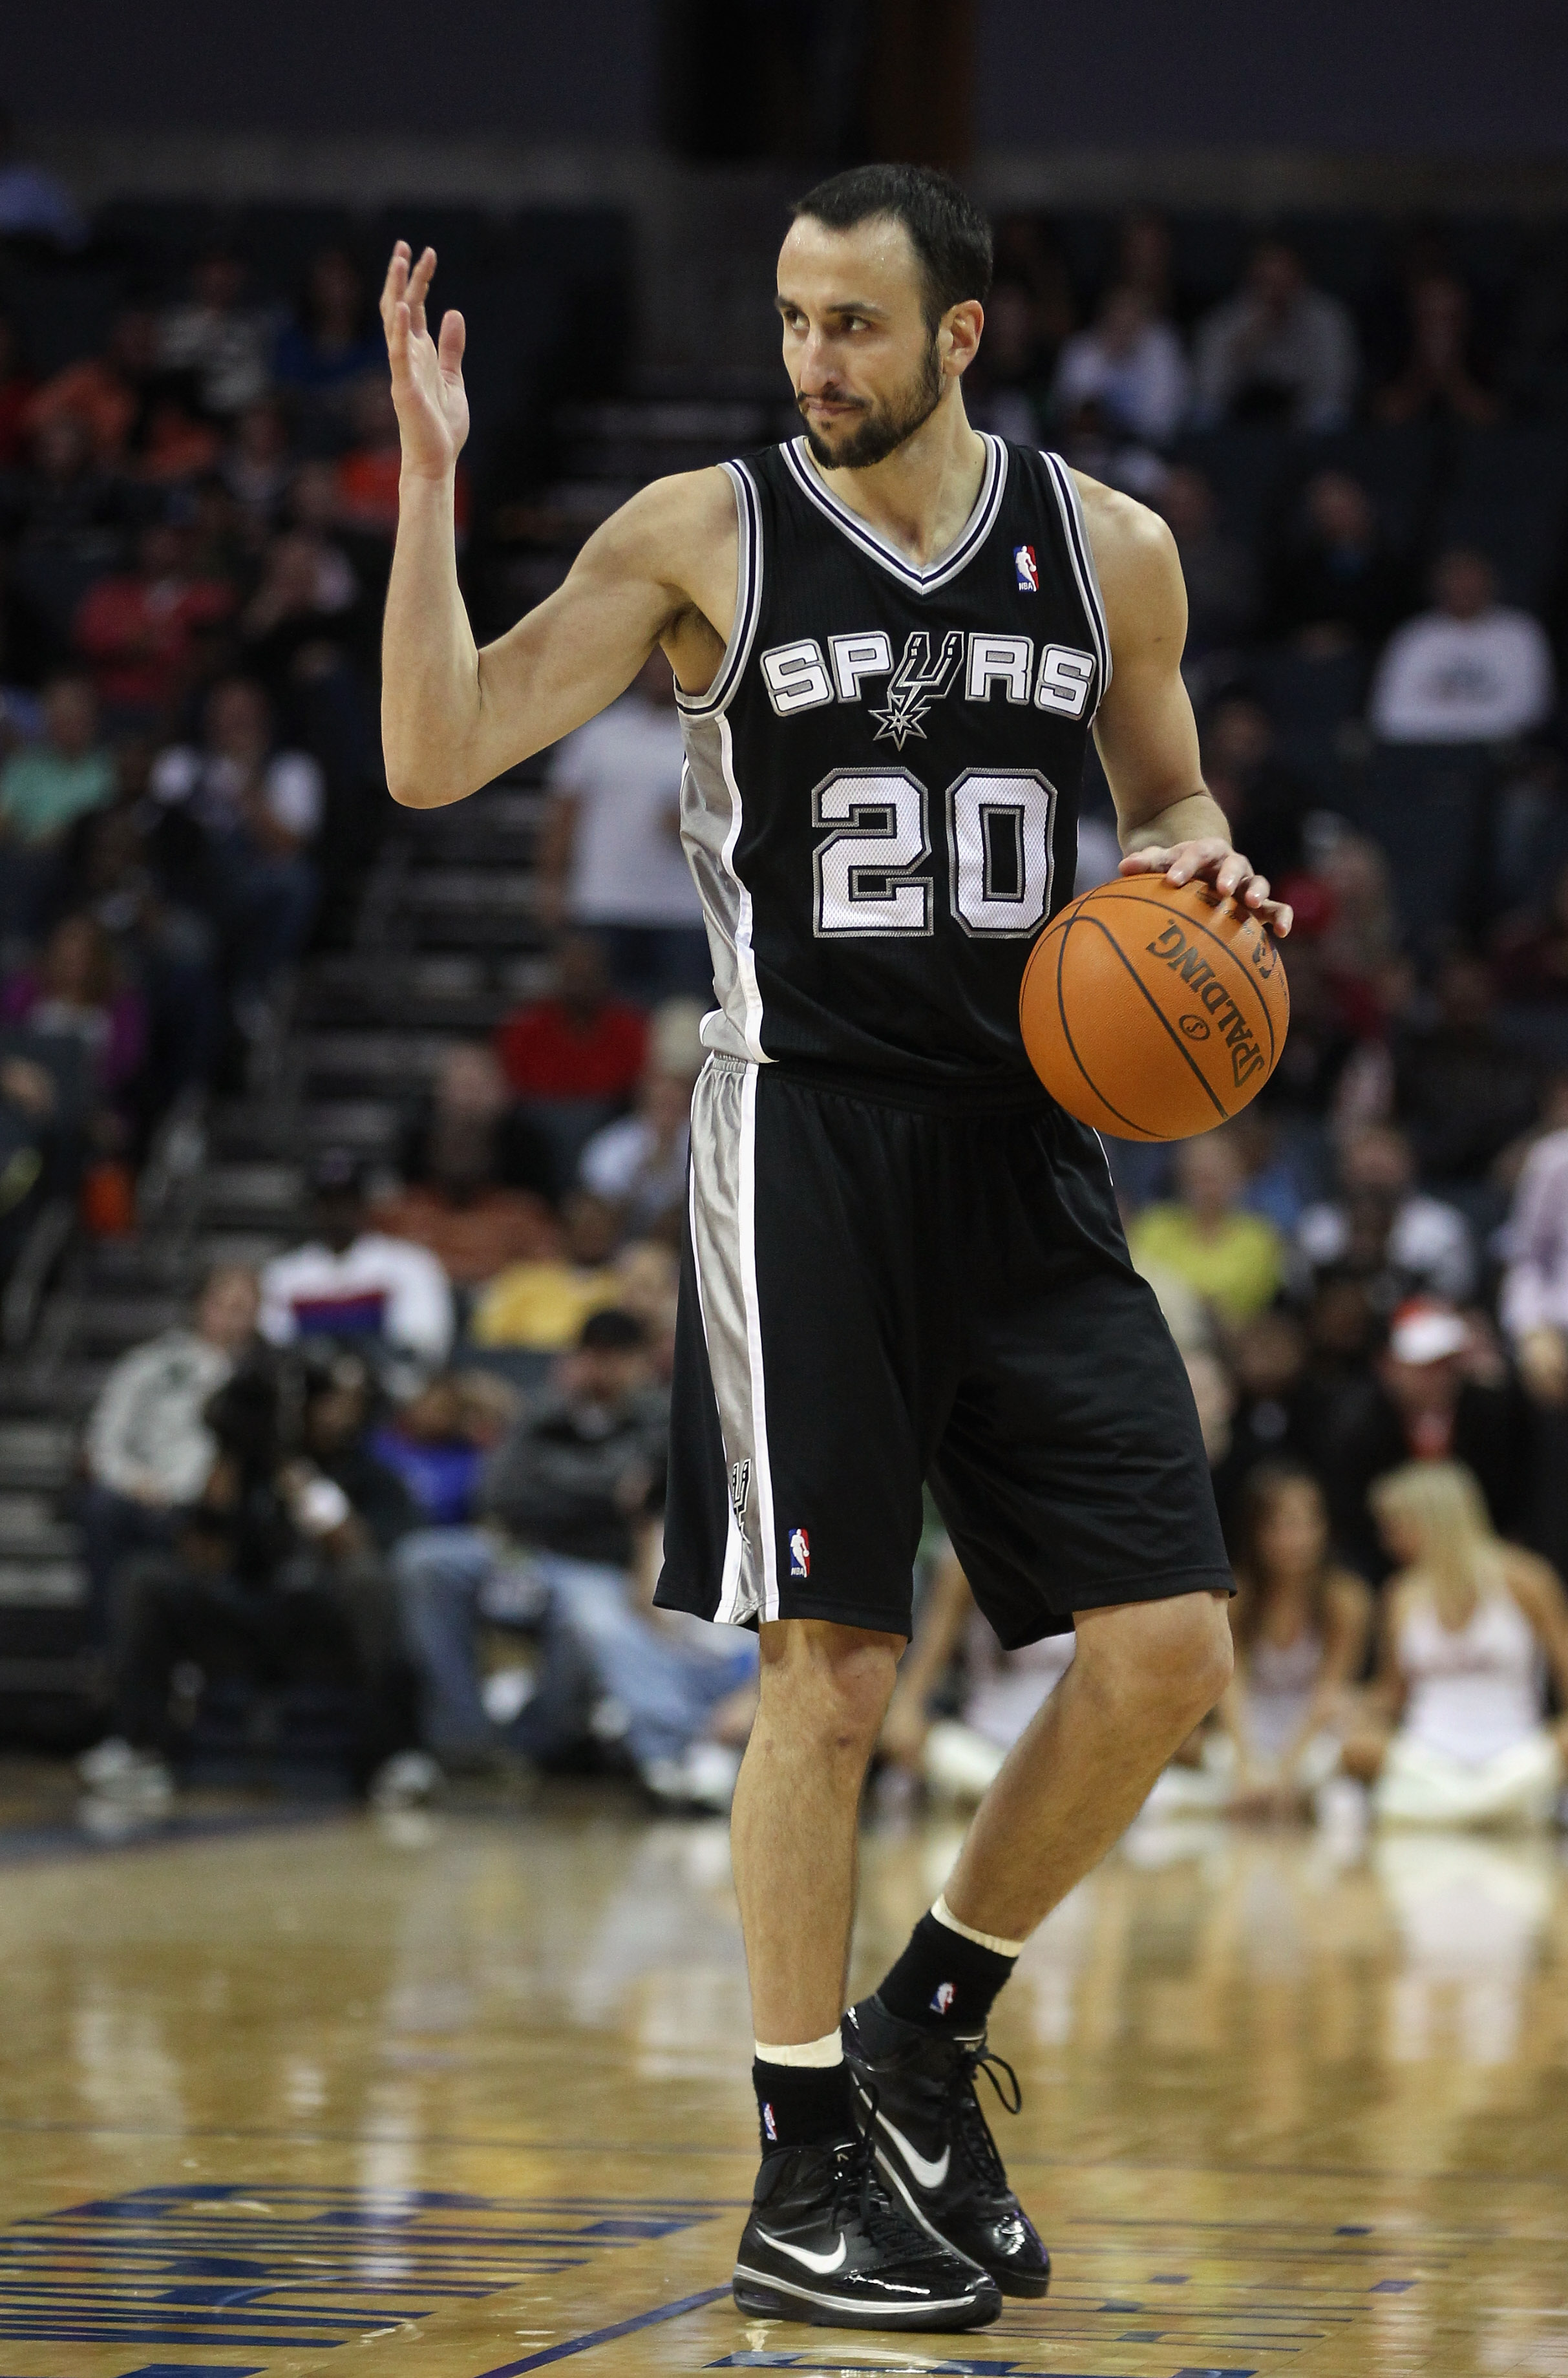 CHARLOTTE, NC - NOVEMBER 08:  Manu Ginobili #20 of the San Antonio Spurs against the Charlotte Bobcats during their game at Time Warner Cable Arena on November 8, 2010 in Charlotte, North Carolina.  NOTE TO USER: User expressly acknowledges and agrees tha